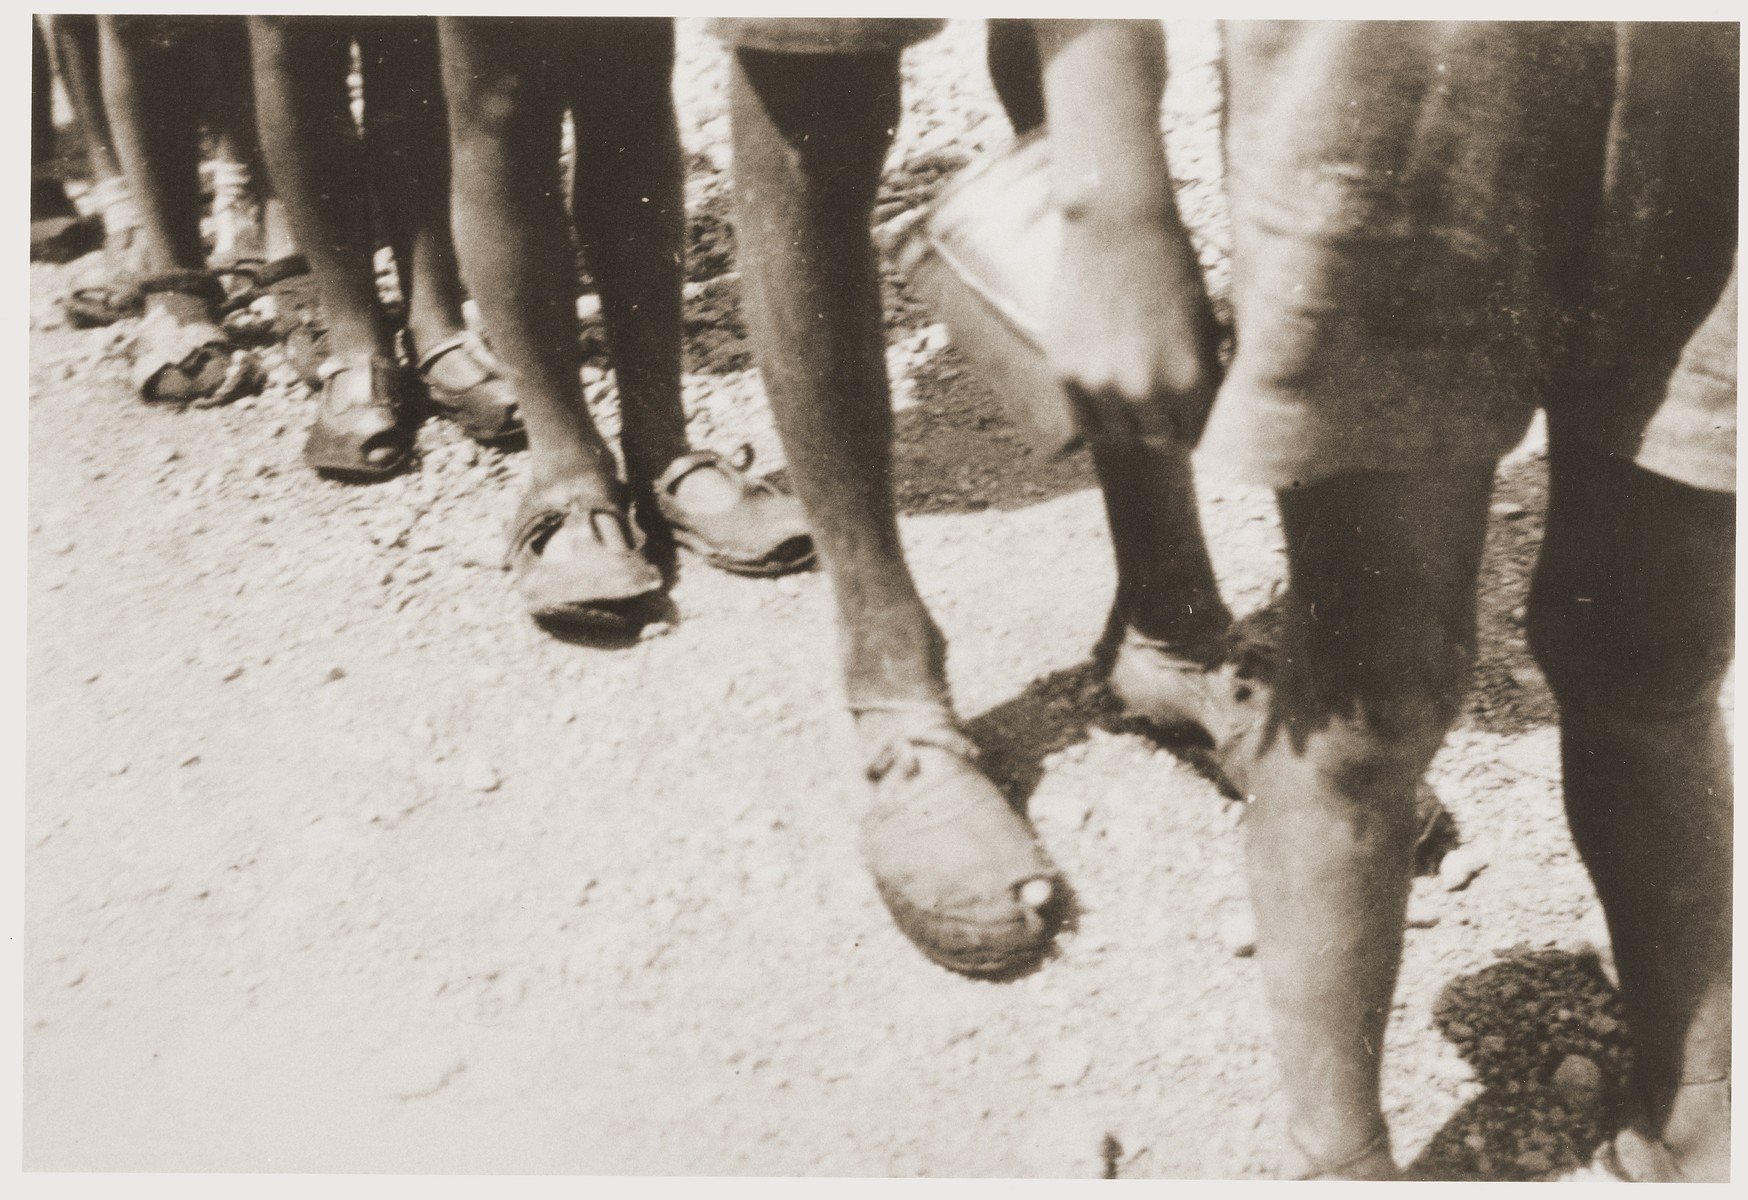 Children stand in line to exchange their old shoes for new ones at the Rivesaltes internment camp.